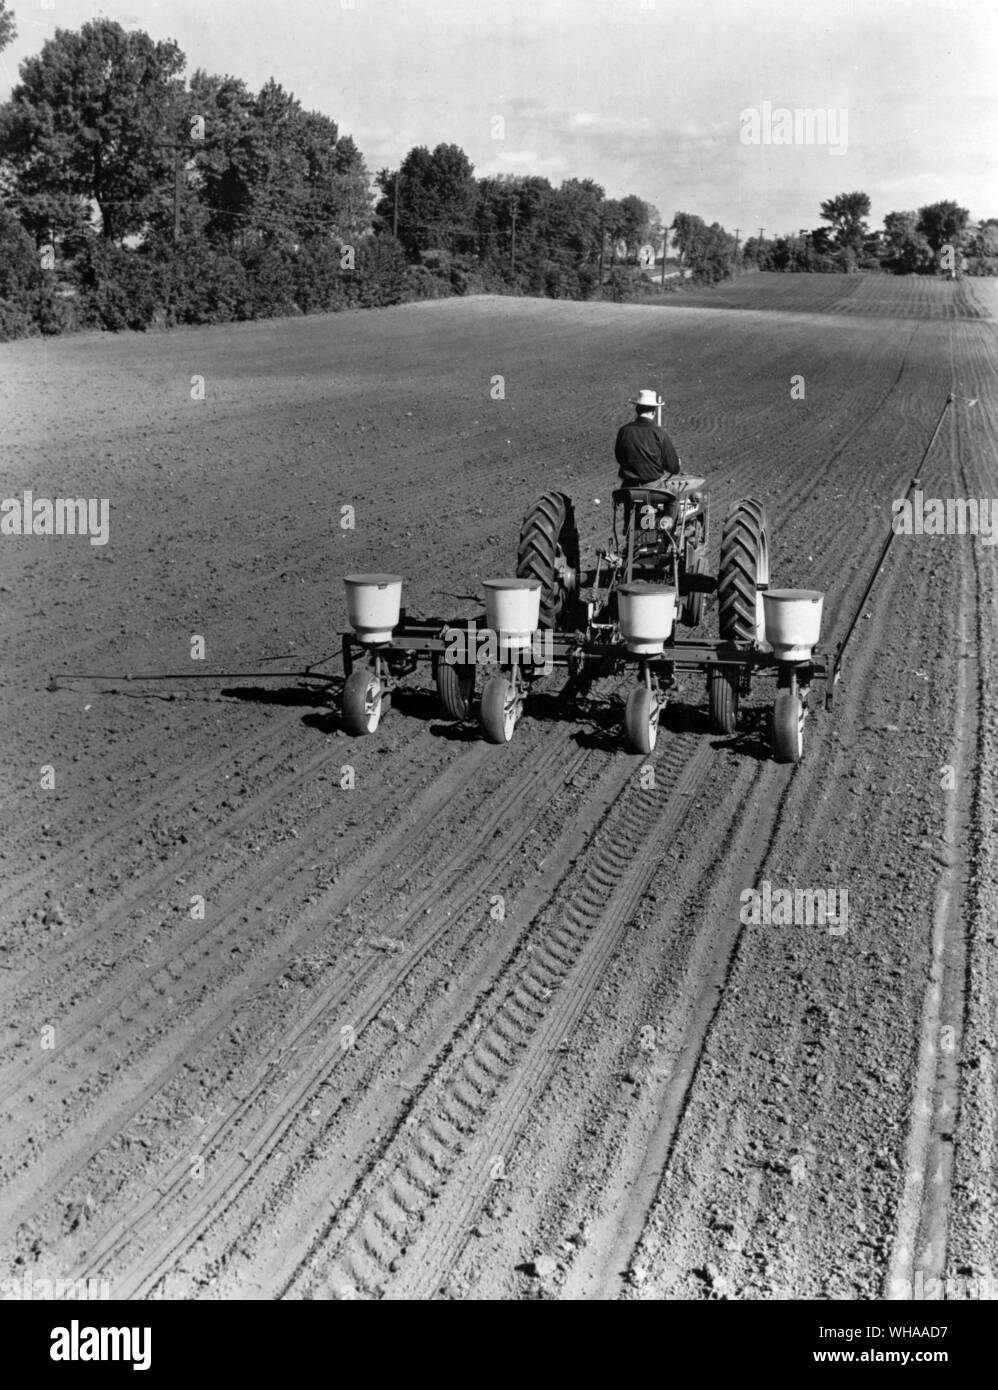 As a result of US tracer research, which proved the advantage of palacing corn fertilizer deep in the soil, the International Harvester Company designed, built and made available to farmers an improved corn planter. The disc type applicator on this new four row planter deposits fertilizer four inches underground on each side of the seed row. Use of the planter has resulted in much larger corn yields and increased profits for farmers. September 12th Stock Photo